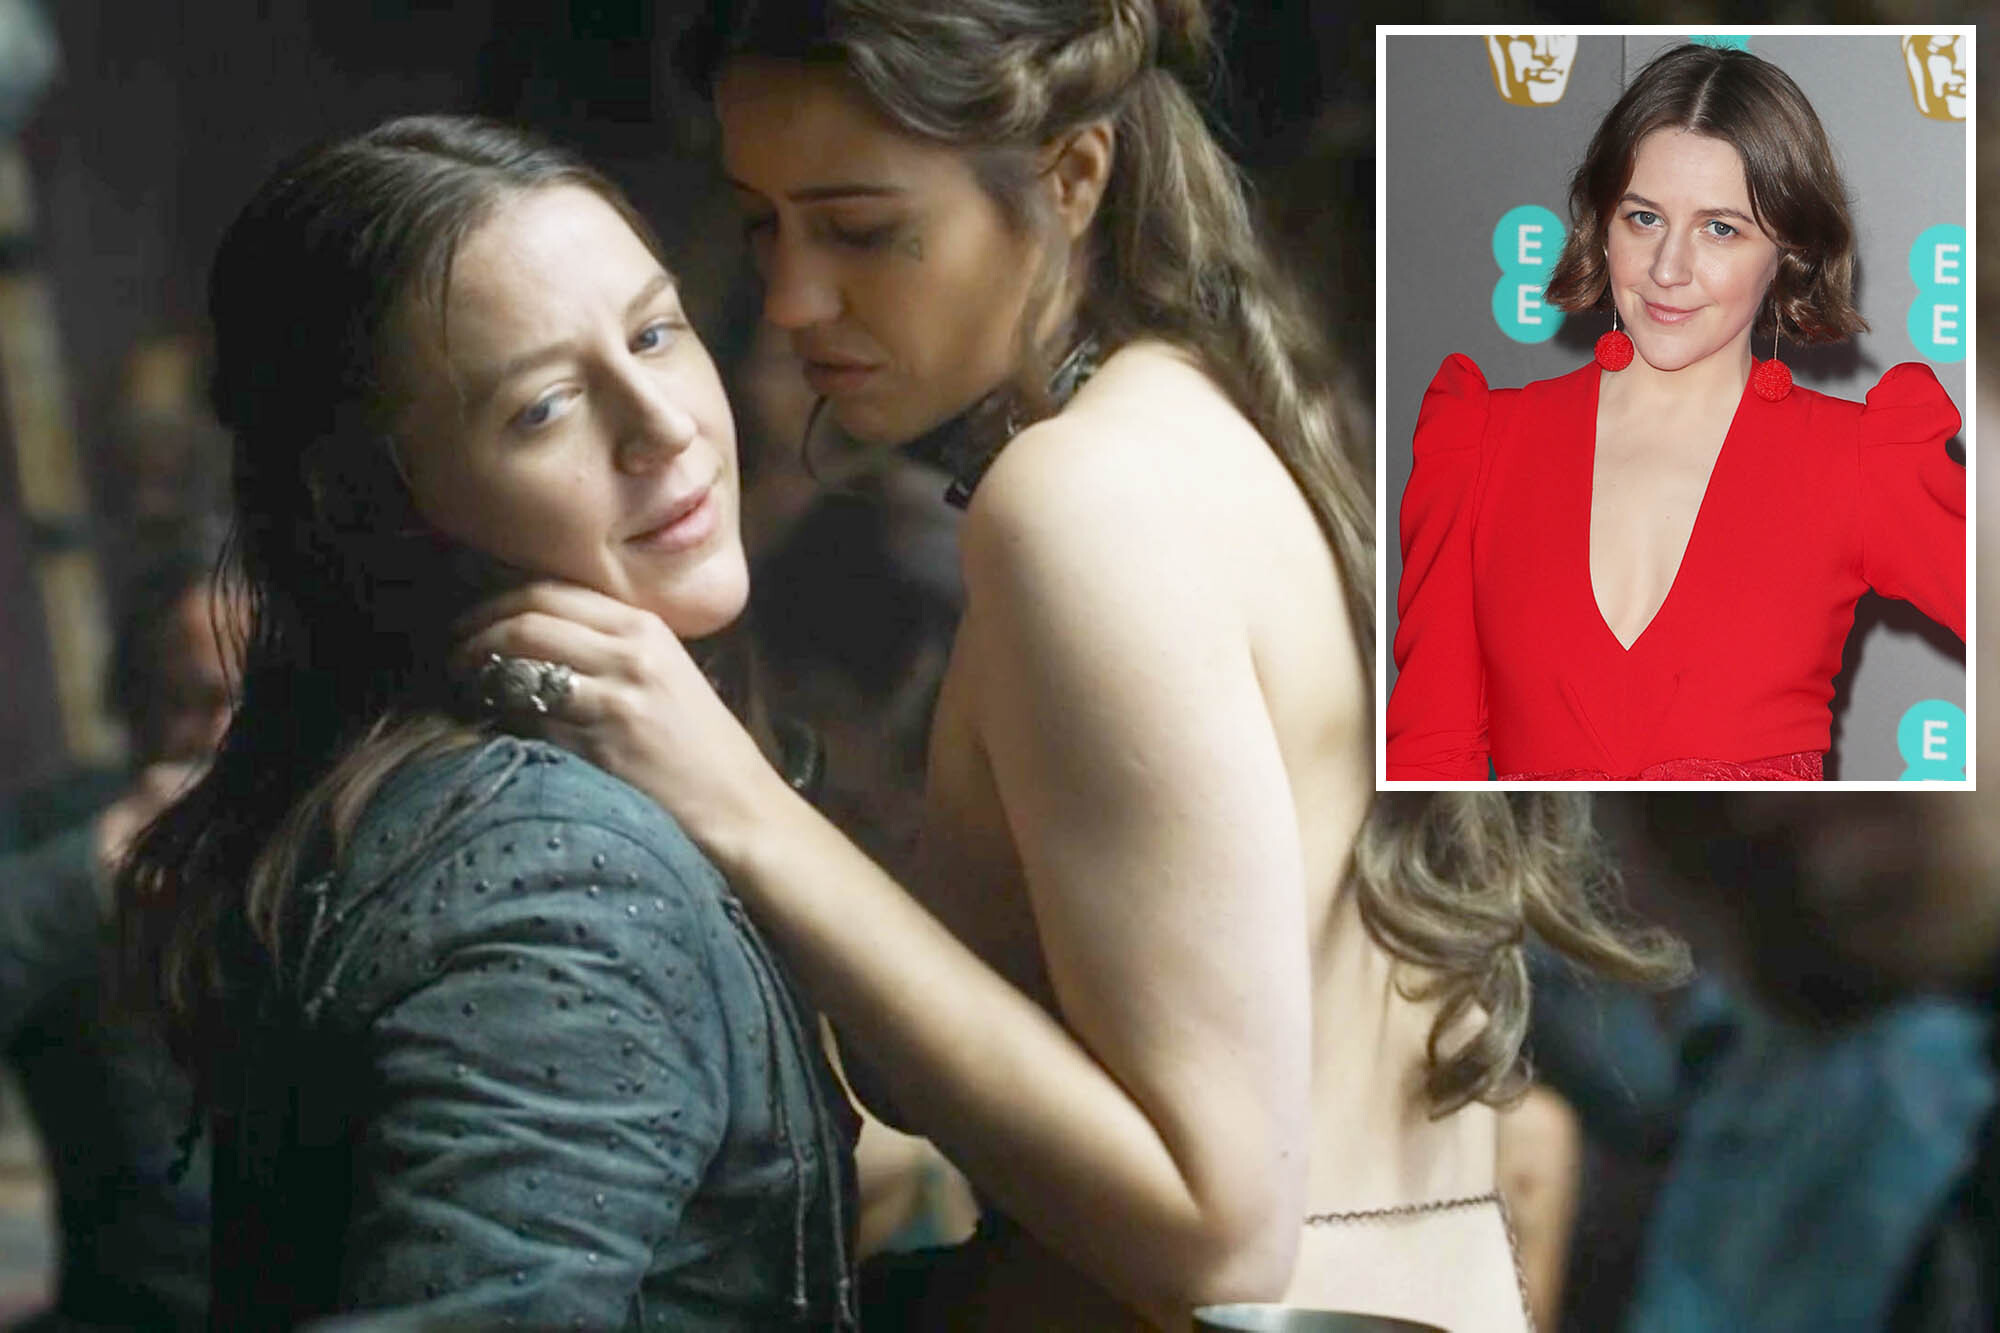 ashlee wolf recommends Lesbian Scenes In Game Of Thrones